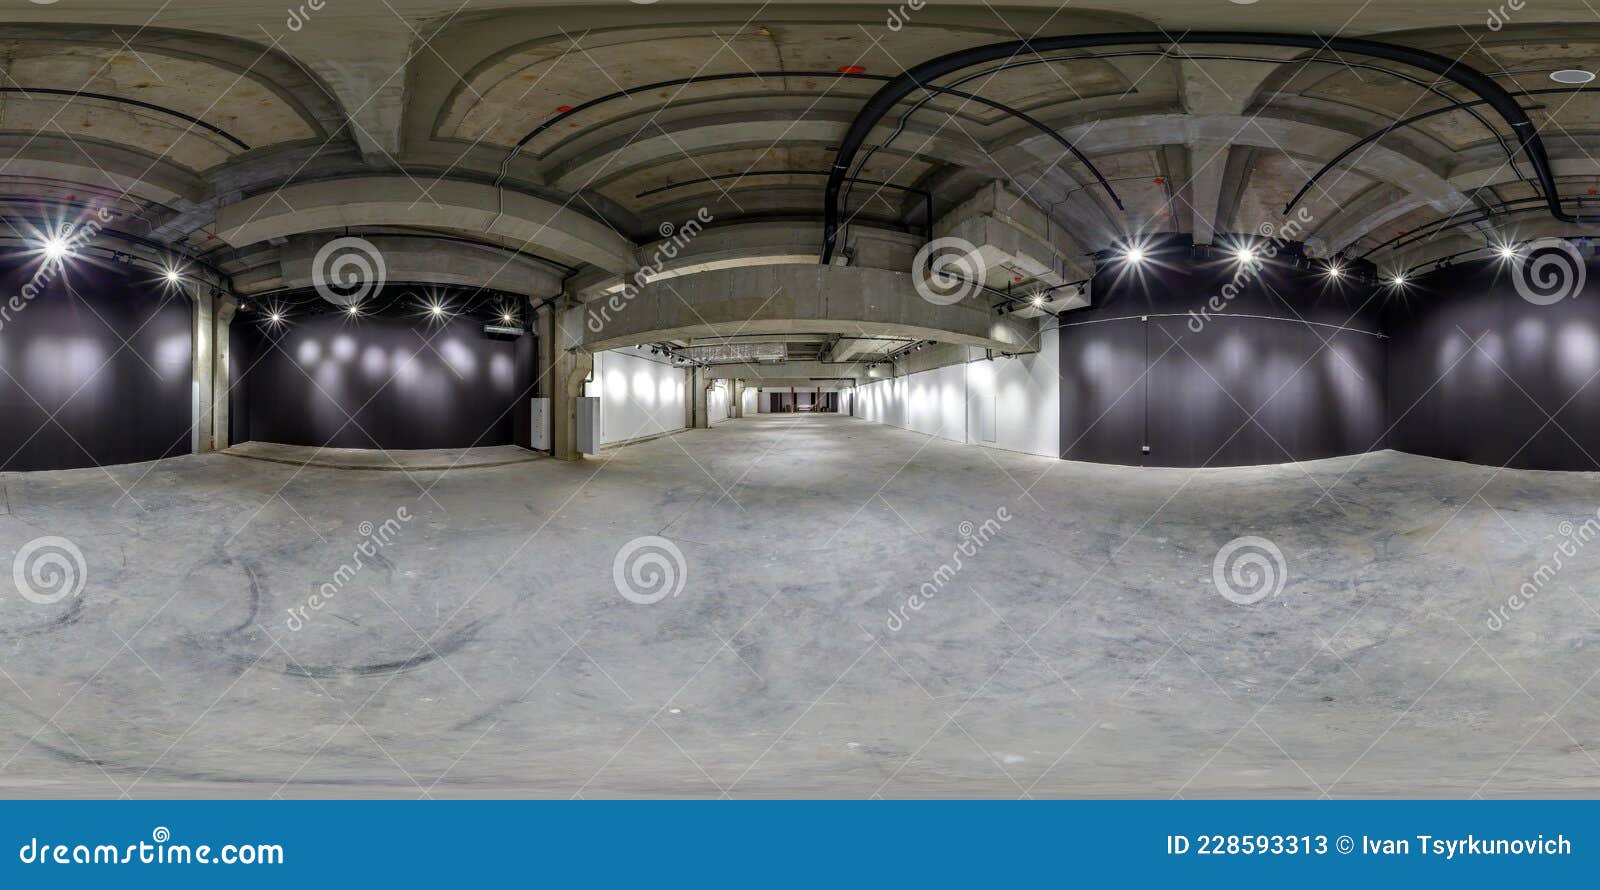 full seamless spherical hdri panorama 360 degrees in interior of large empty room as warehouse, hangar or gallery with spotlights